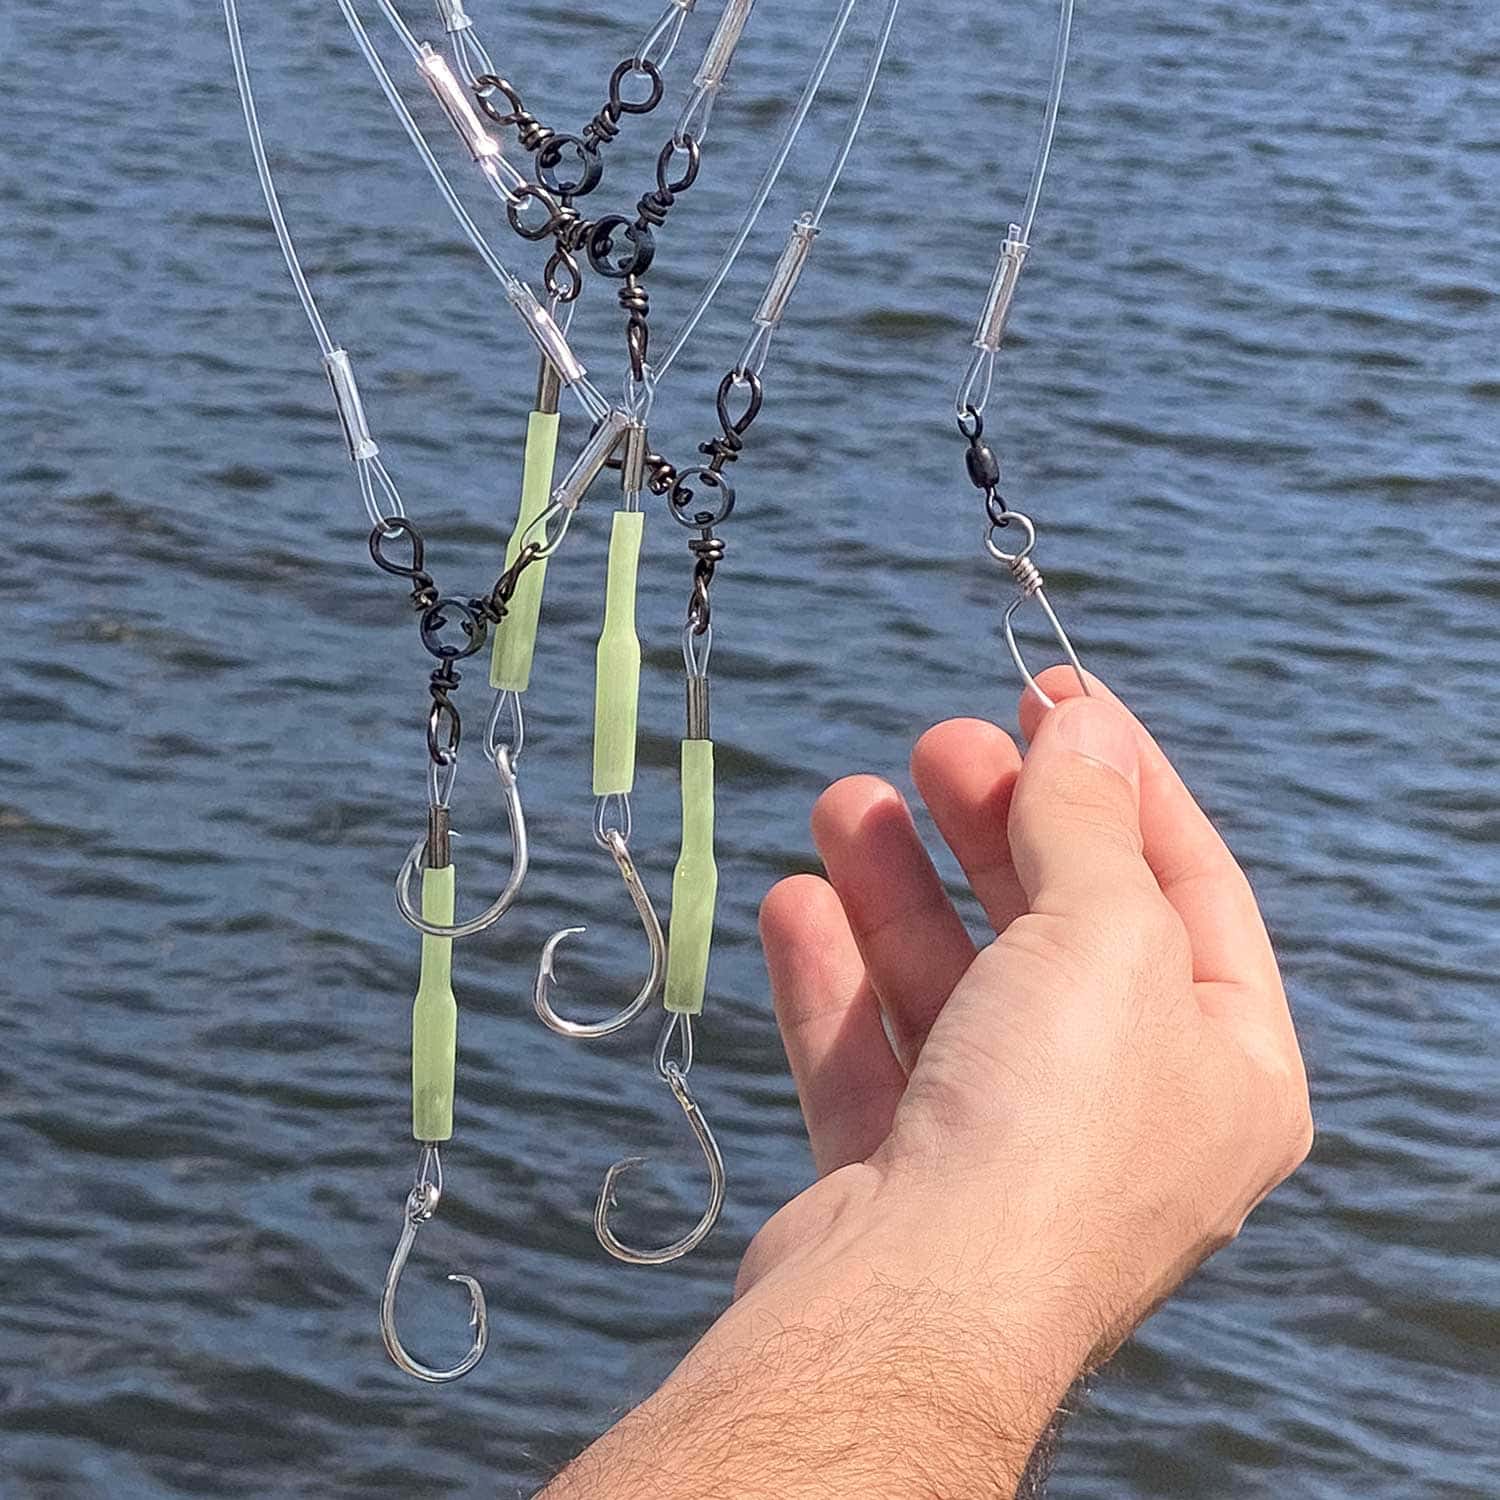 DISCO Deep Drop Rigs, Fishing and Outdoor Content Specialist